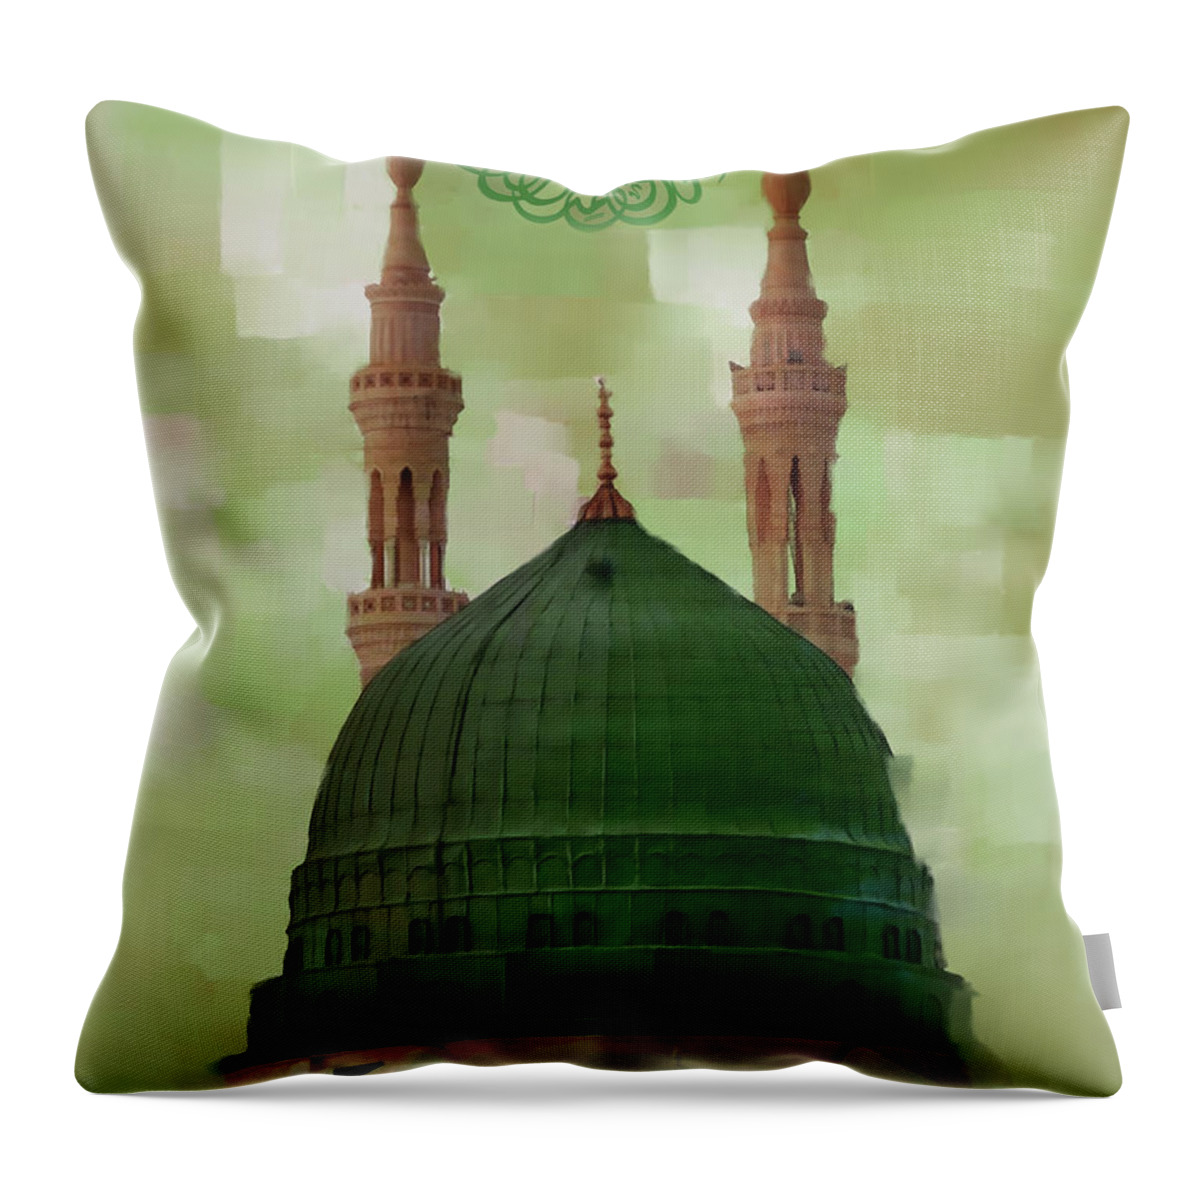 Kufic Calligraphy Throw Pillow featuring the painting Al Masjid An Nabawi #1 by Gull G